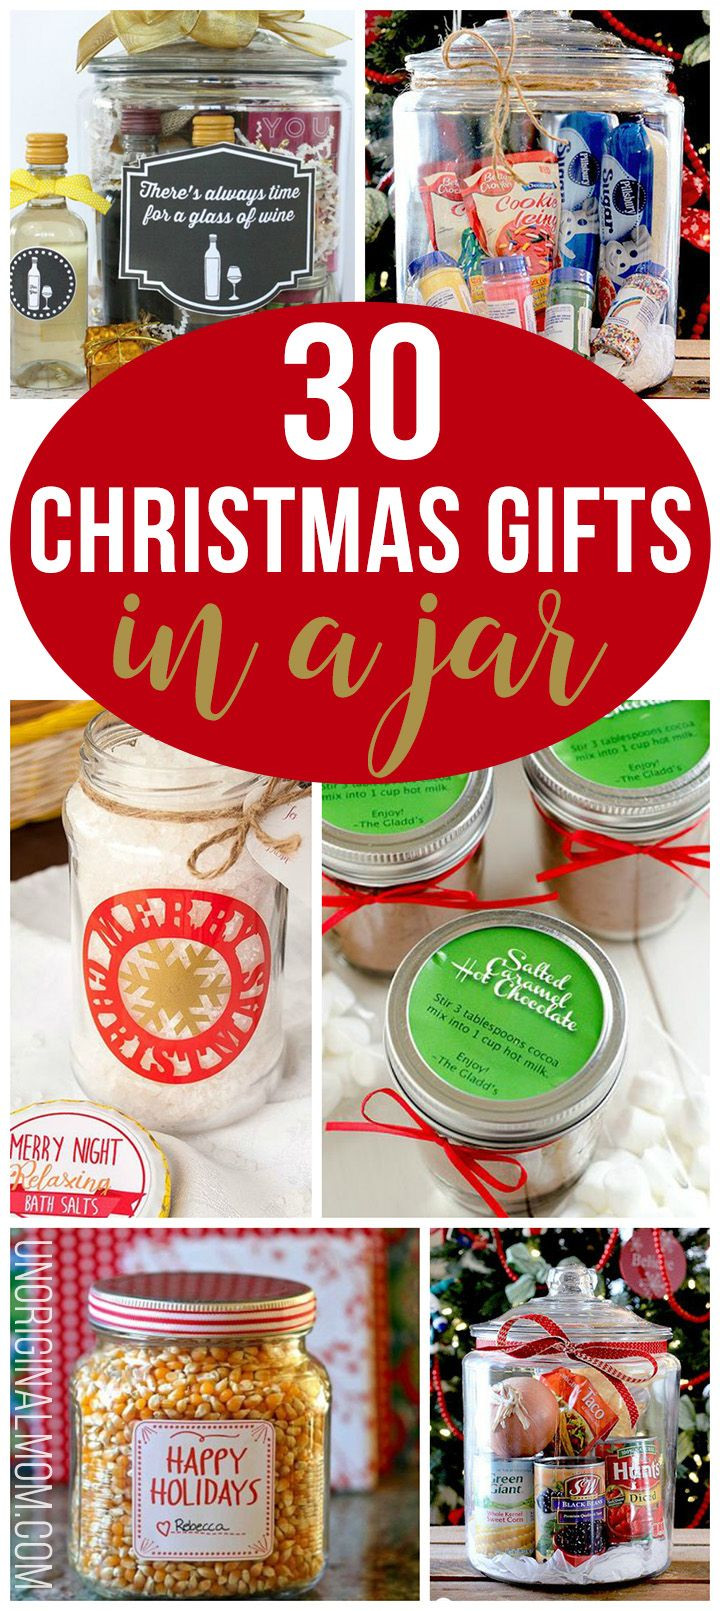 Uniques Christmas Gift Ideas
 30 Christmas Gifts in a Jar